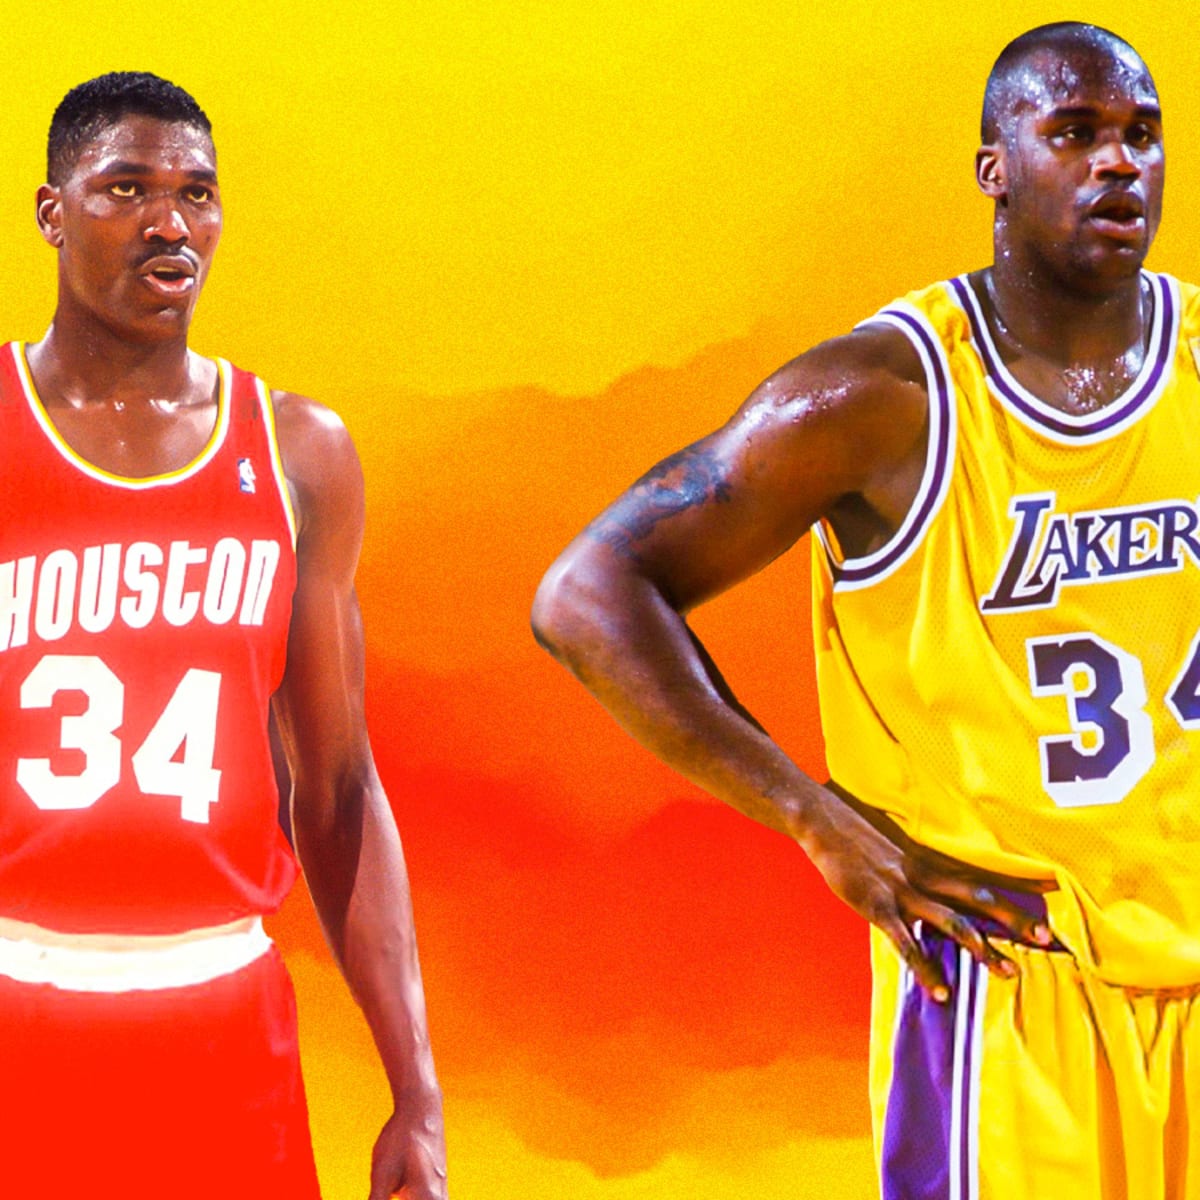 I don't think Hakeem can hold the Lakers Shaq - Quentin